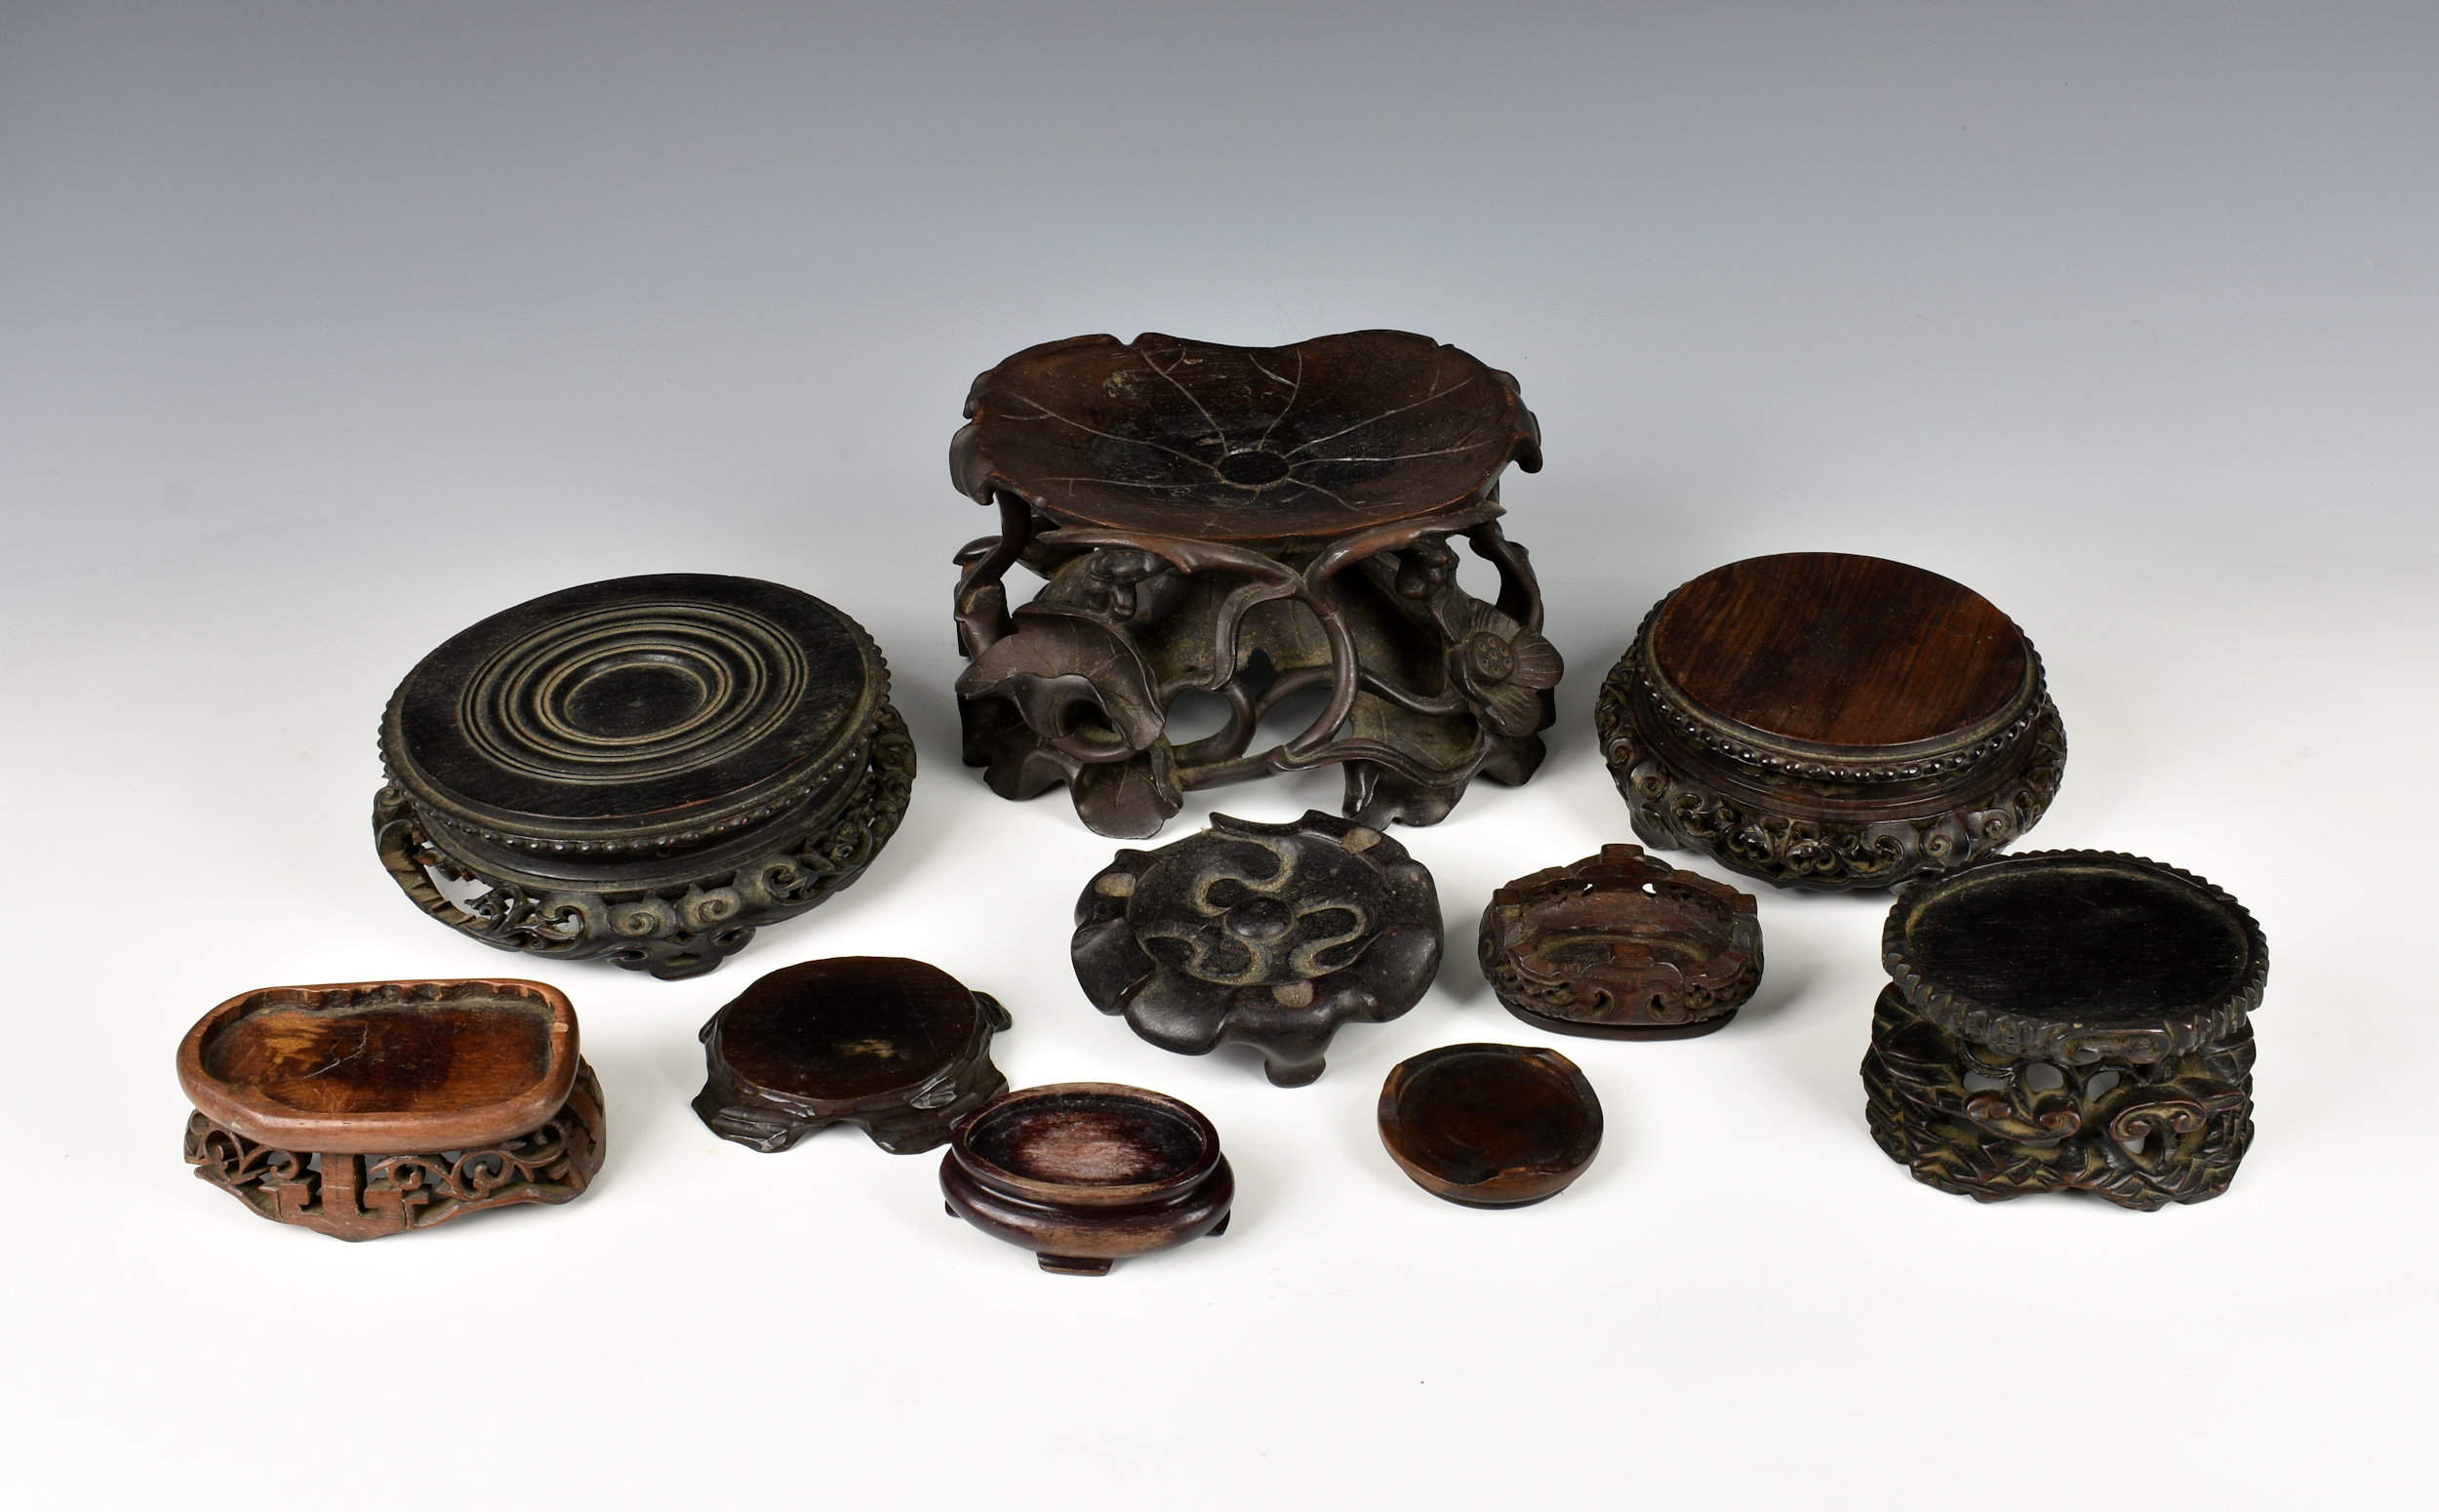 A small collection of Chinese carved hardwood stands 19th to early 20th century, the largest of